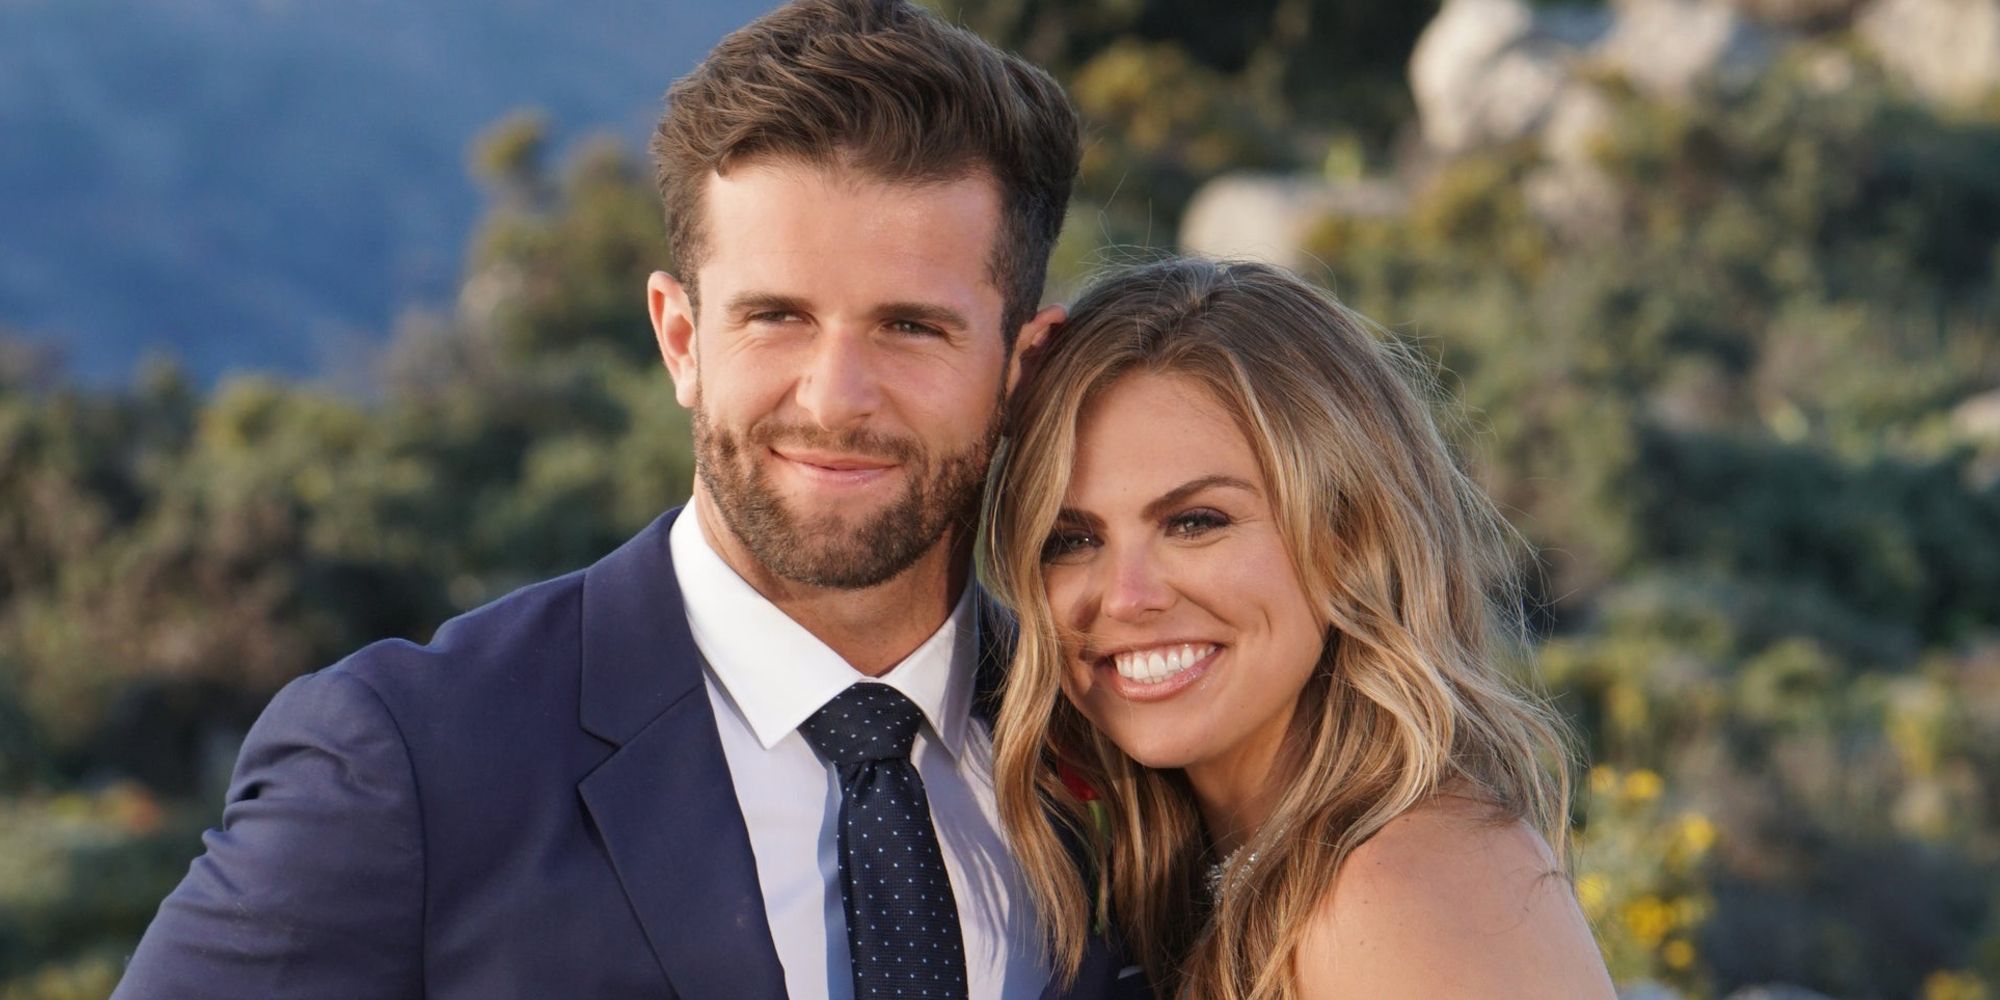 The Bachelorette What Happened To Hannah Brown And Jed Wyatt After Season 15